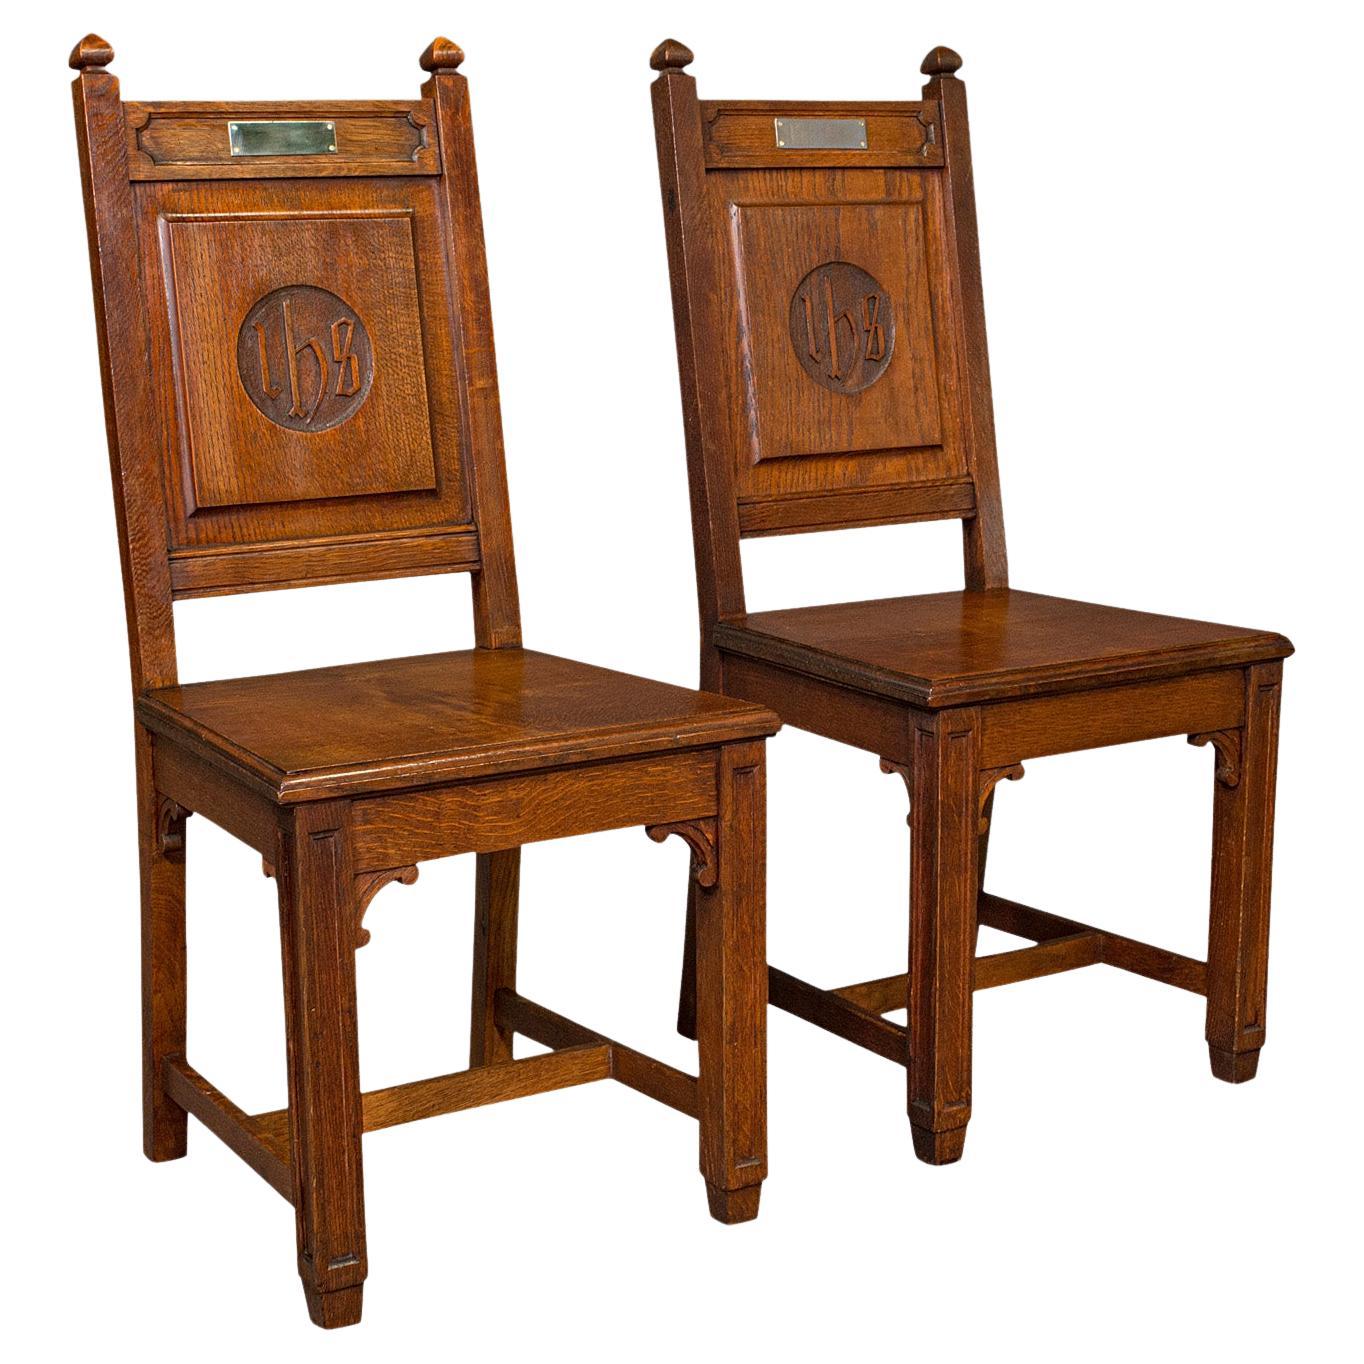 Pair of Antique Hall Chairs, English Oak, Dining Seat, Ecclesiastical, Victorian